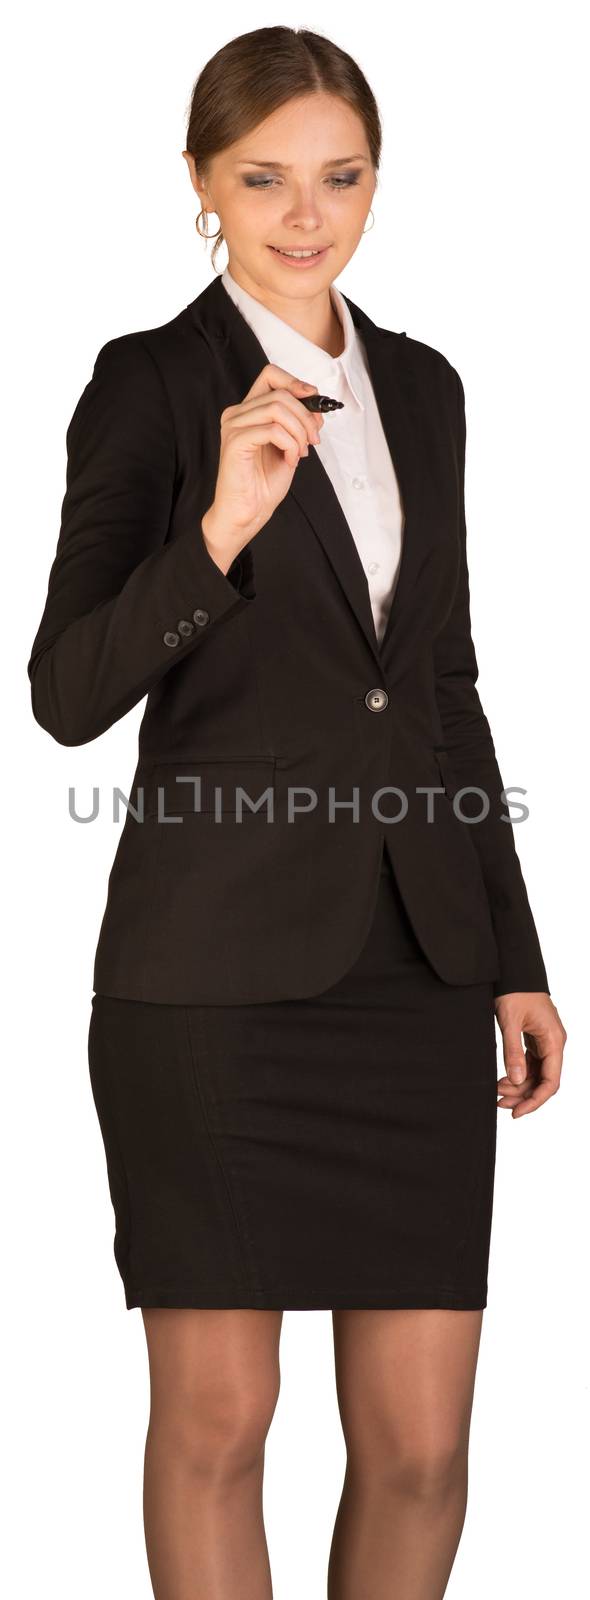 Beautiful girl in business suit holding pen and writing. Isolated on white background